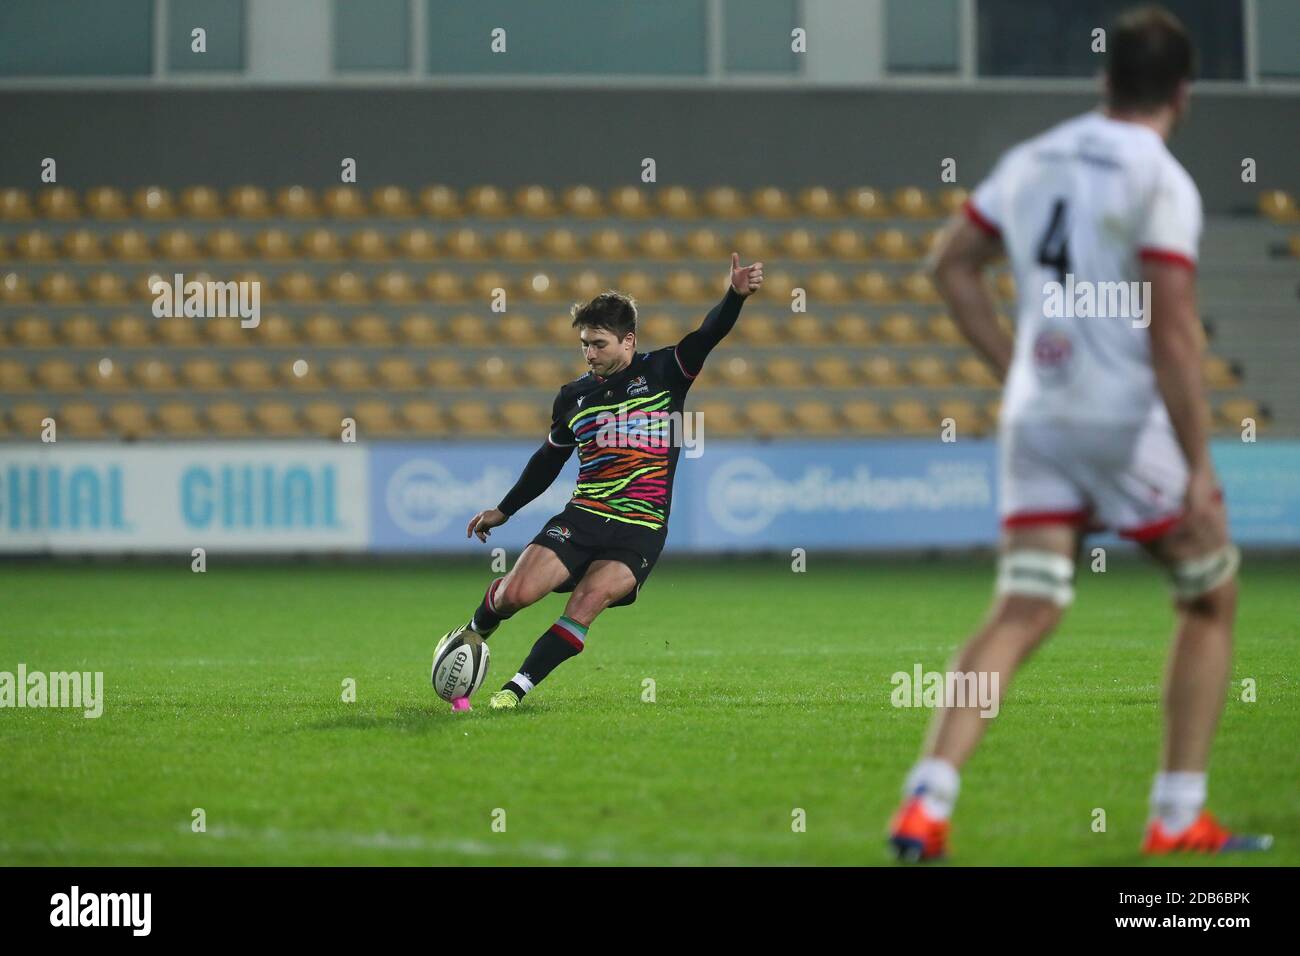 Parma, Italy. 16th Nov, 2020. parma, Italy, Sergio Lanfranchi stadium, 16 Nov 2020, Antonio Rizzi (Zebre) during Zebre Rugby vs Ulster Rugby - Rugby Guinness Pro 14 match - Credit: LM/Massimiliano Carnabuci Credit: Massimiliano Carnabuci/LPS/ZUMA Wire/Alamy Live News Stock Photo